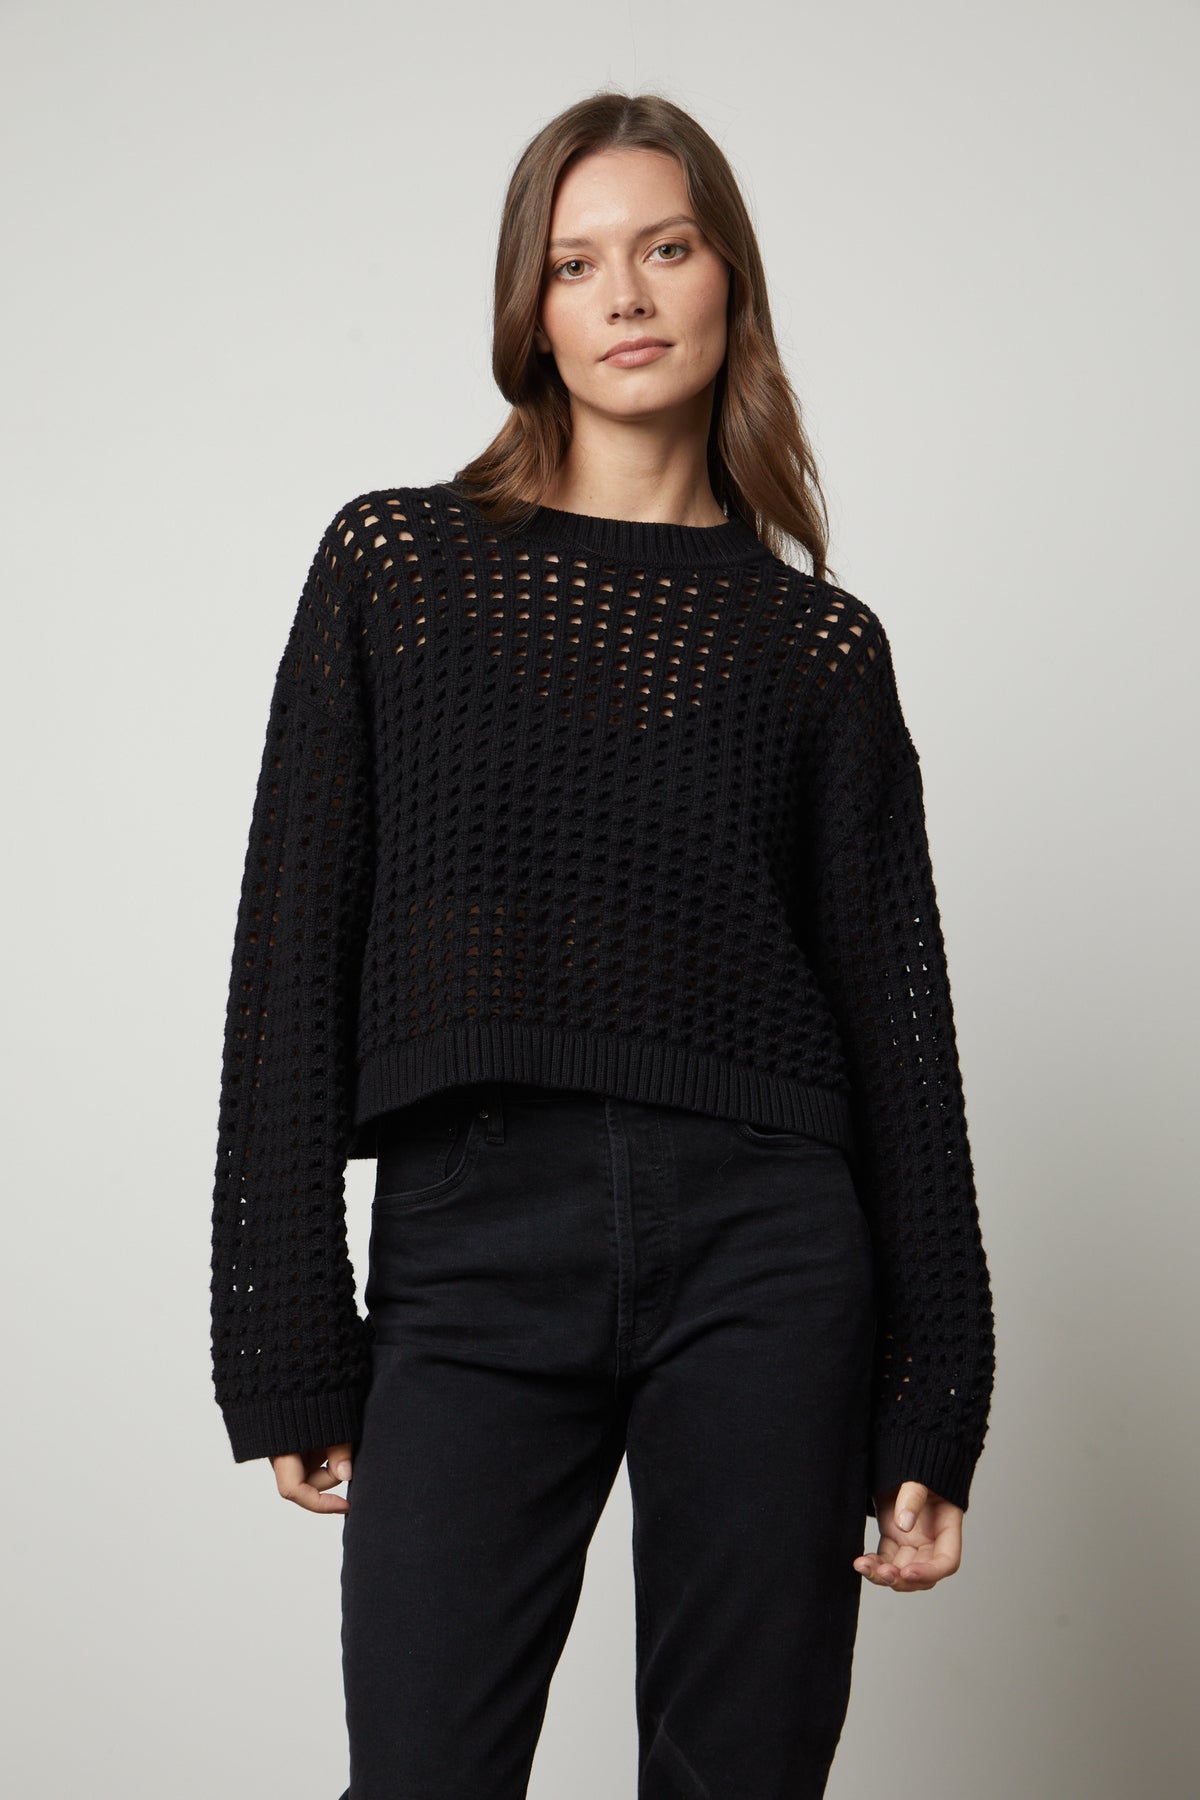   A model wearing a black SAMMIE MESH KNIT CREW NECK SWEATER by Velvet by Graham & Spencer and jeans. 